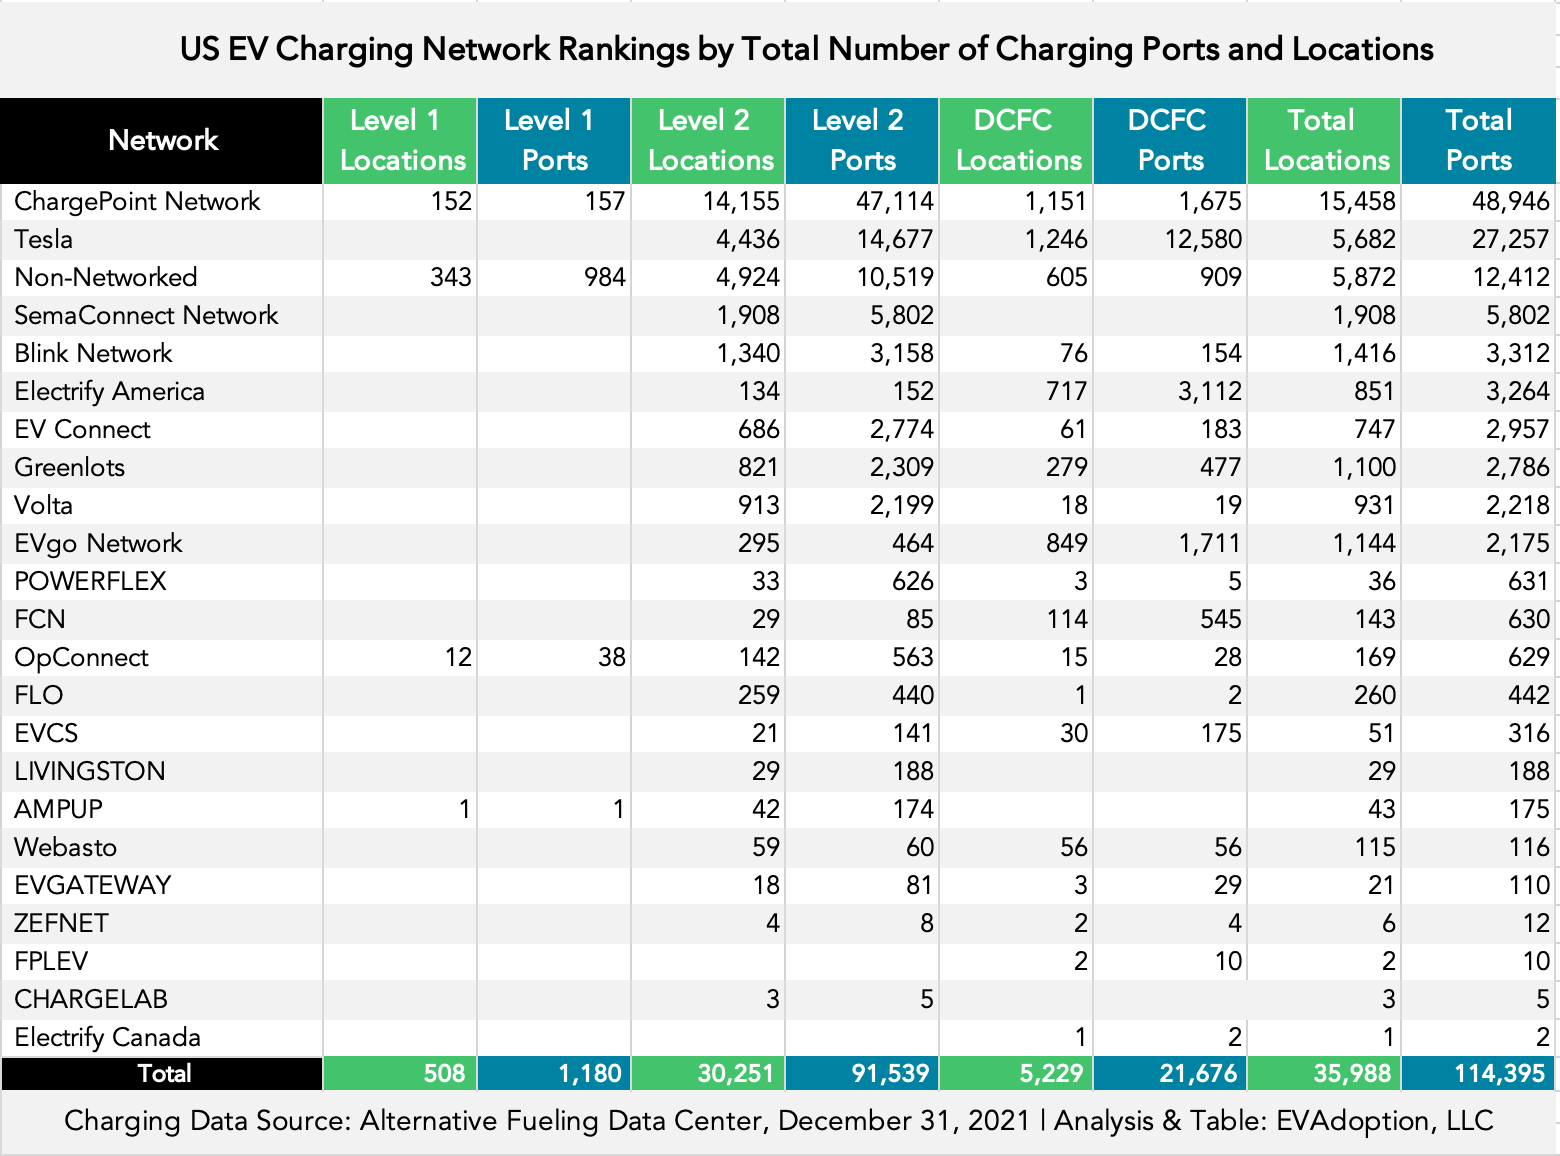 Overall Ranking of Charging Networks by Total Ports-Locations-2-12.31.21